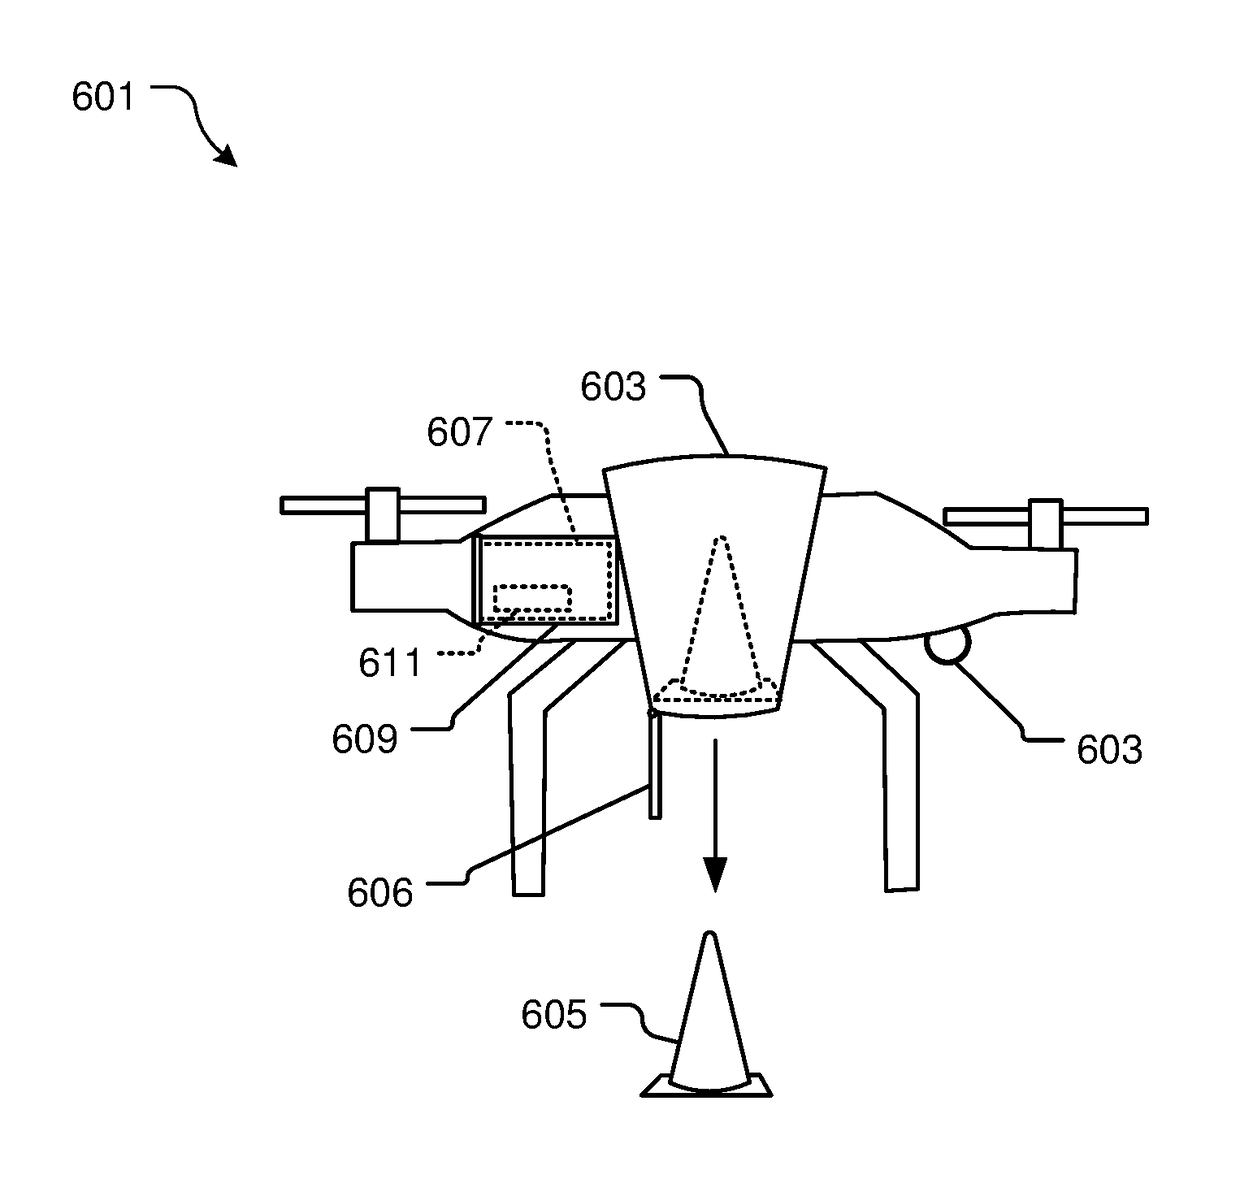 Unmanned aerial vehicle system and method of use